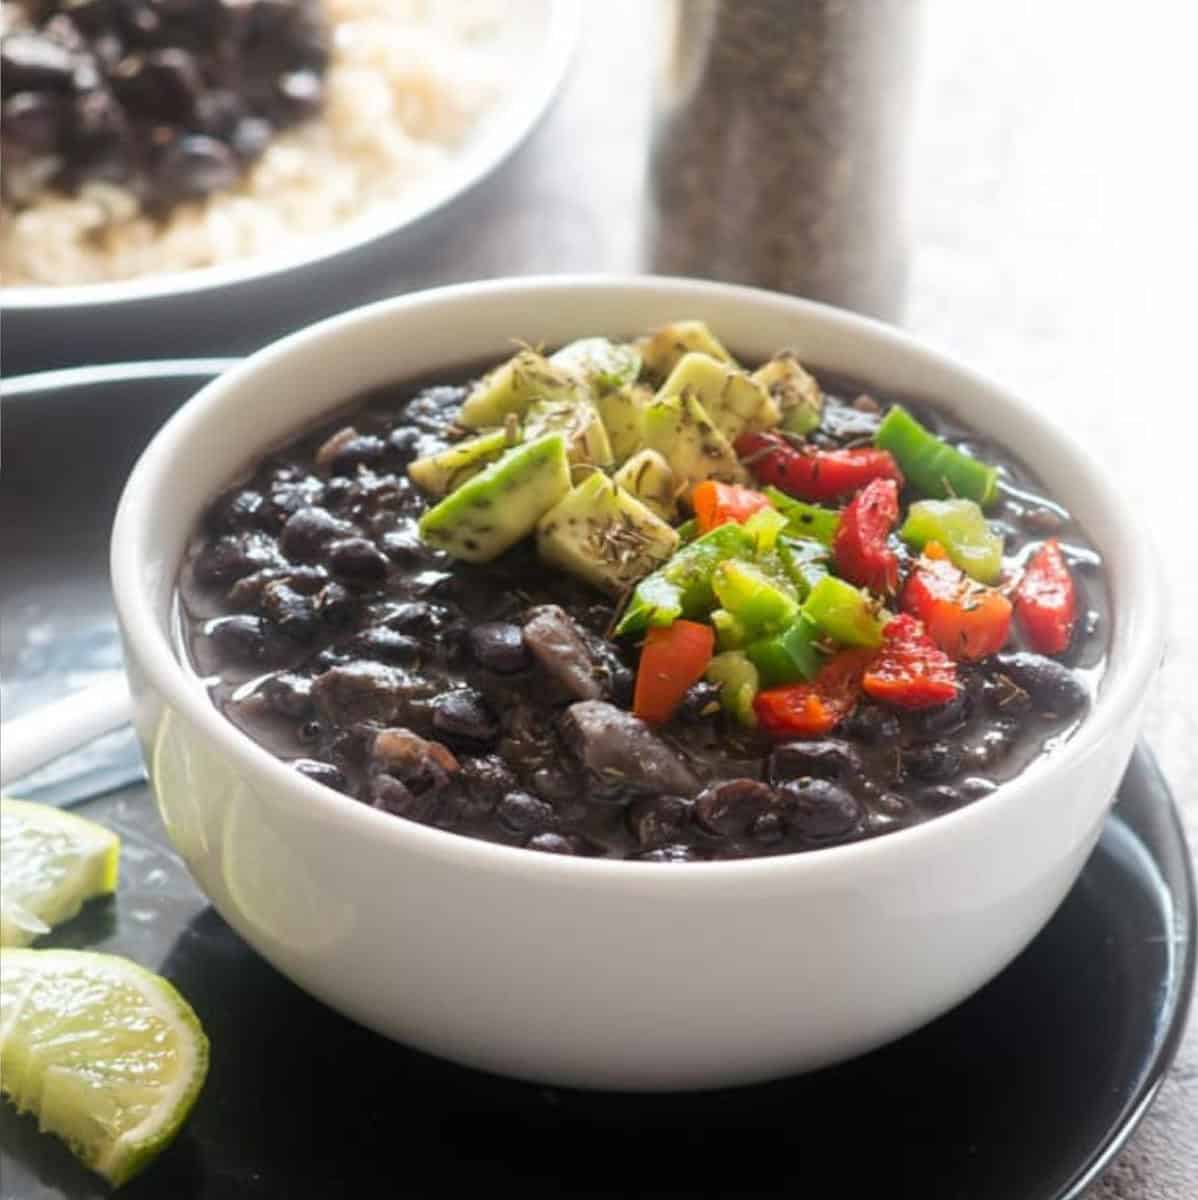  There's no need for meat with these vegan Cuban black beans, loaded with protein and fiber.